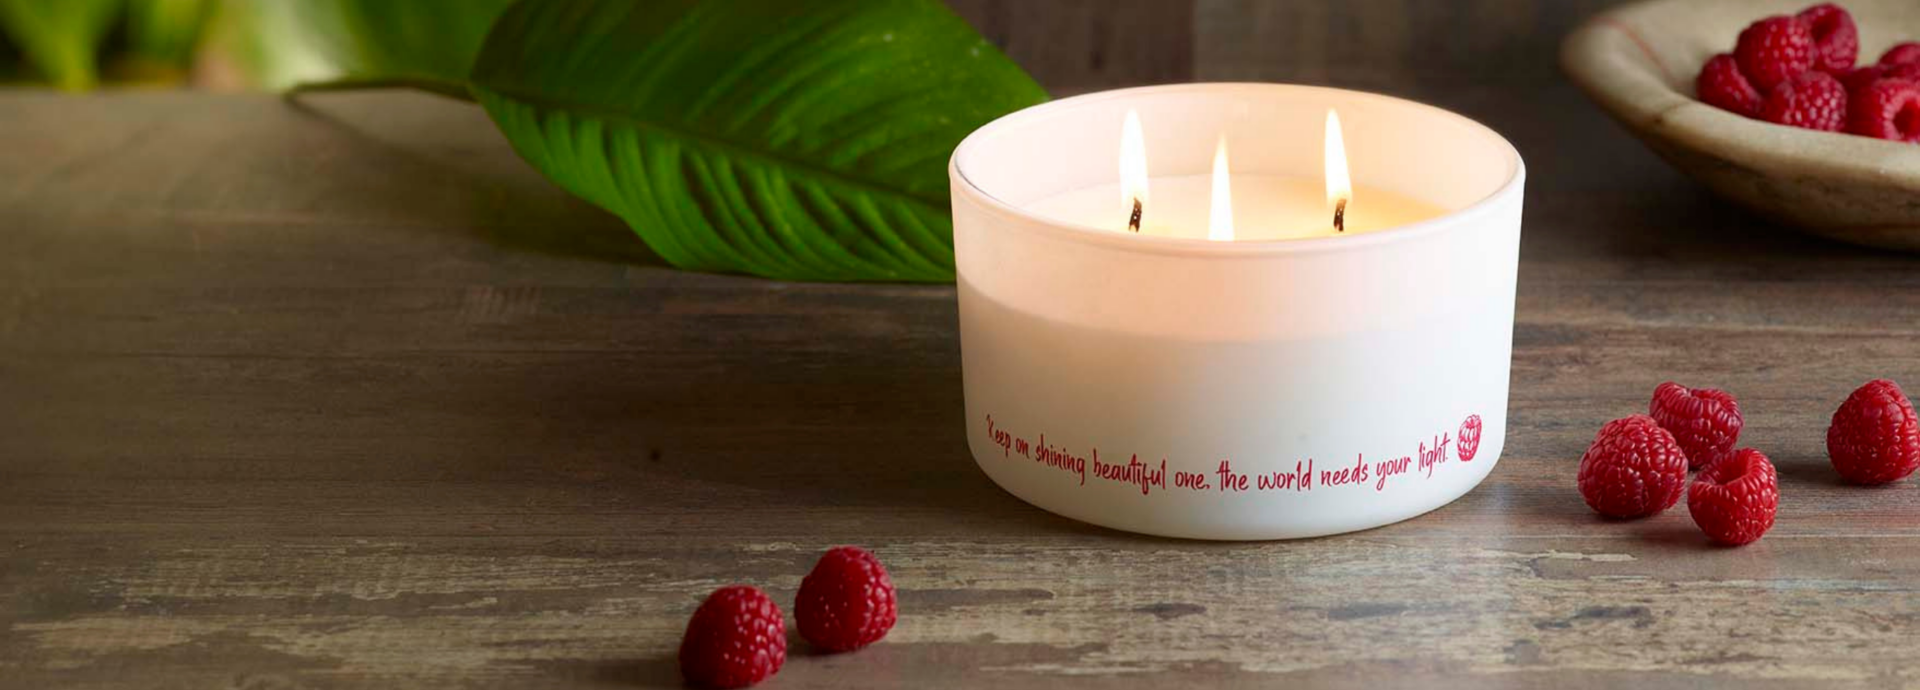 Discover the new body&bess scented candle!